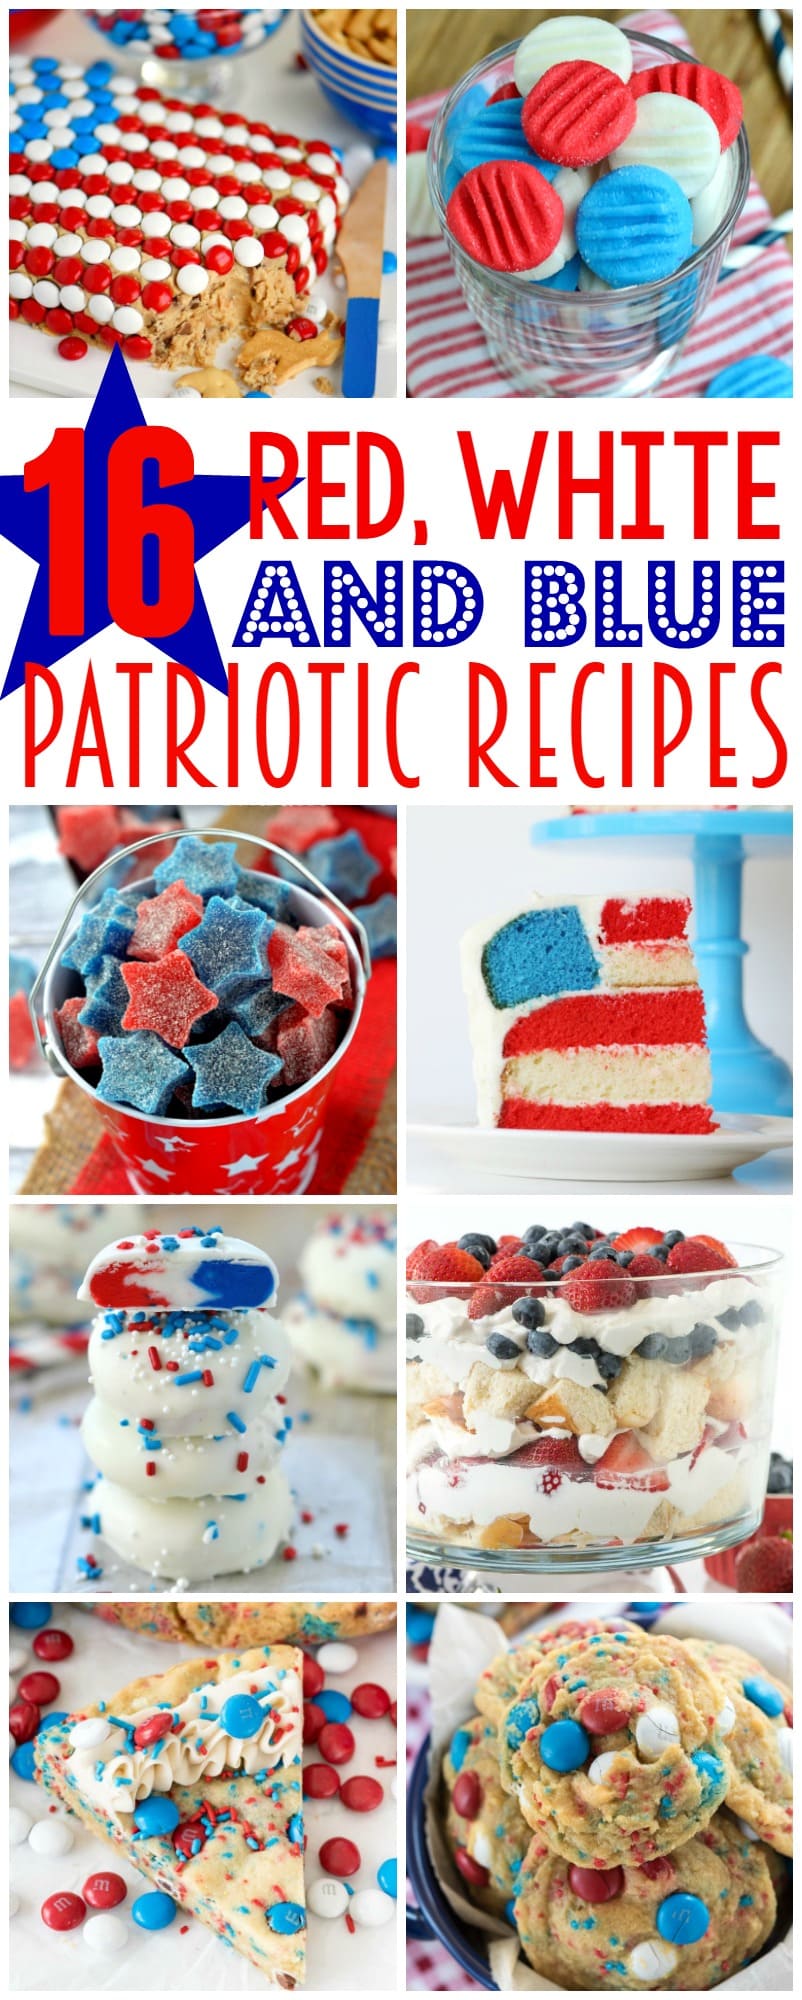 Celebrate this 4th of July weekend with all things red, white, and blue! I've rounded up some amazing Red, White, and Blue Patriotic Recipes here for you to enjoy with your friends and family! Pick your favorite and get ready party! All these recipes are ideal for Memorial Day and Labor Day weekend as well!